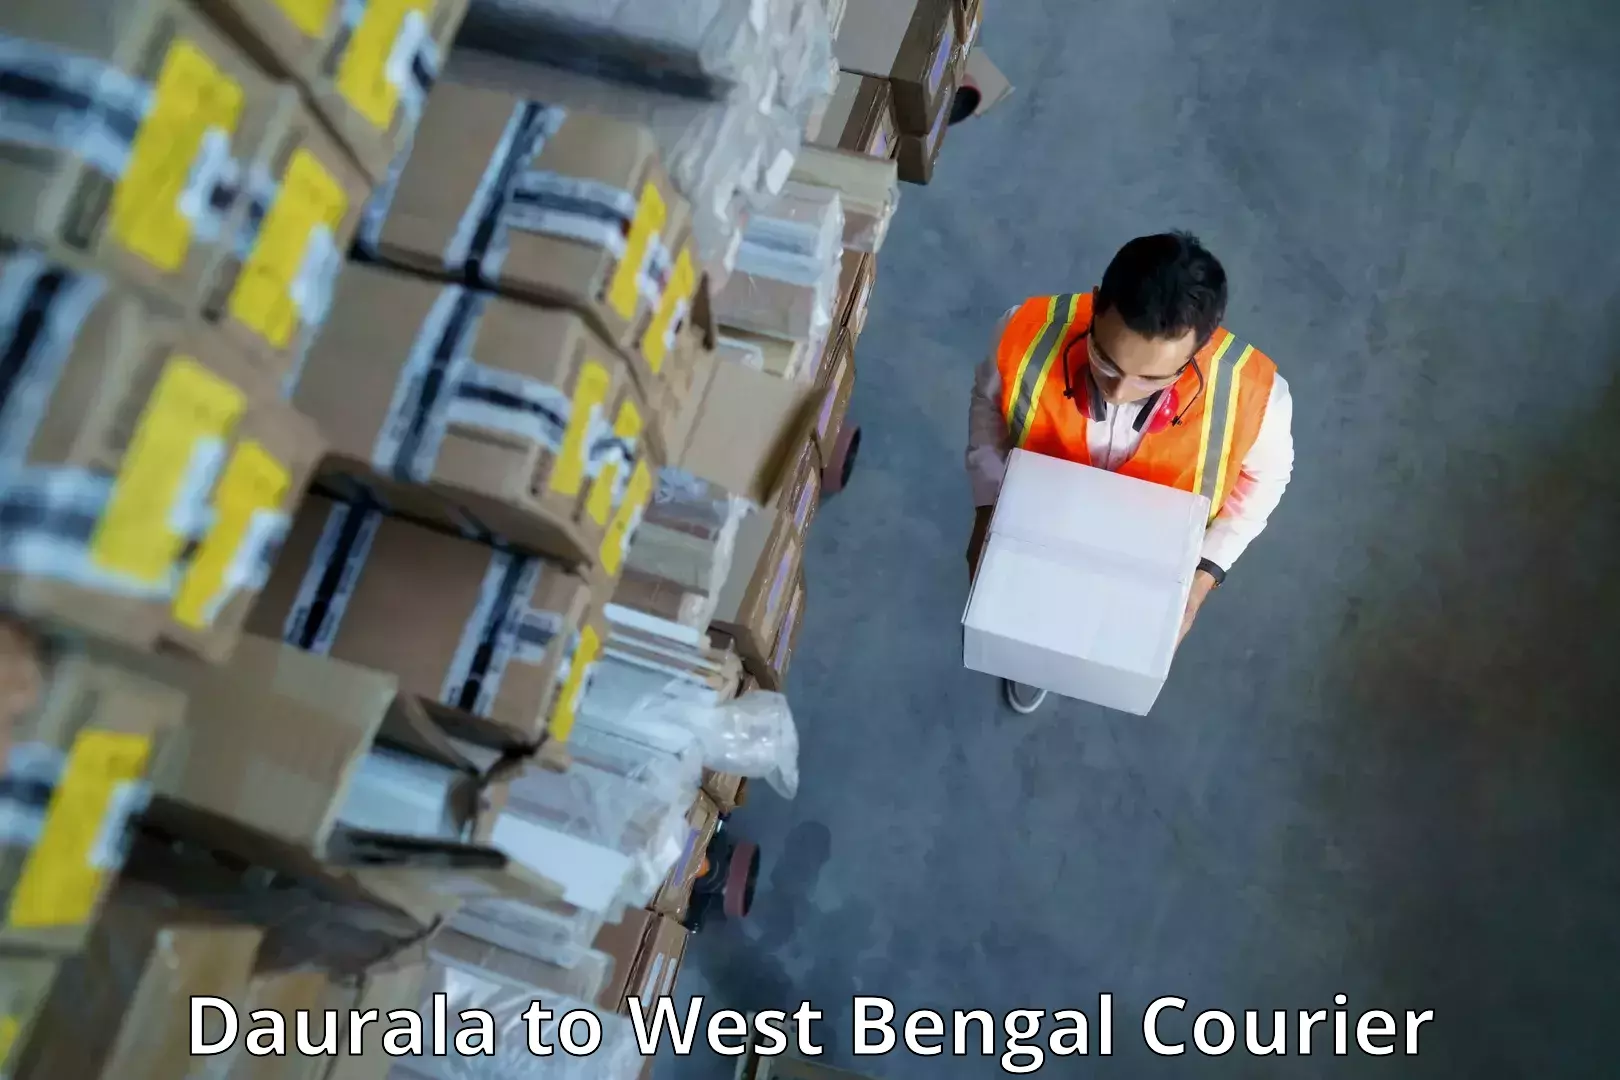 24/7 courier service in Daurala to Mejia